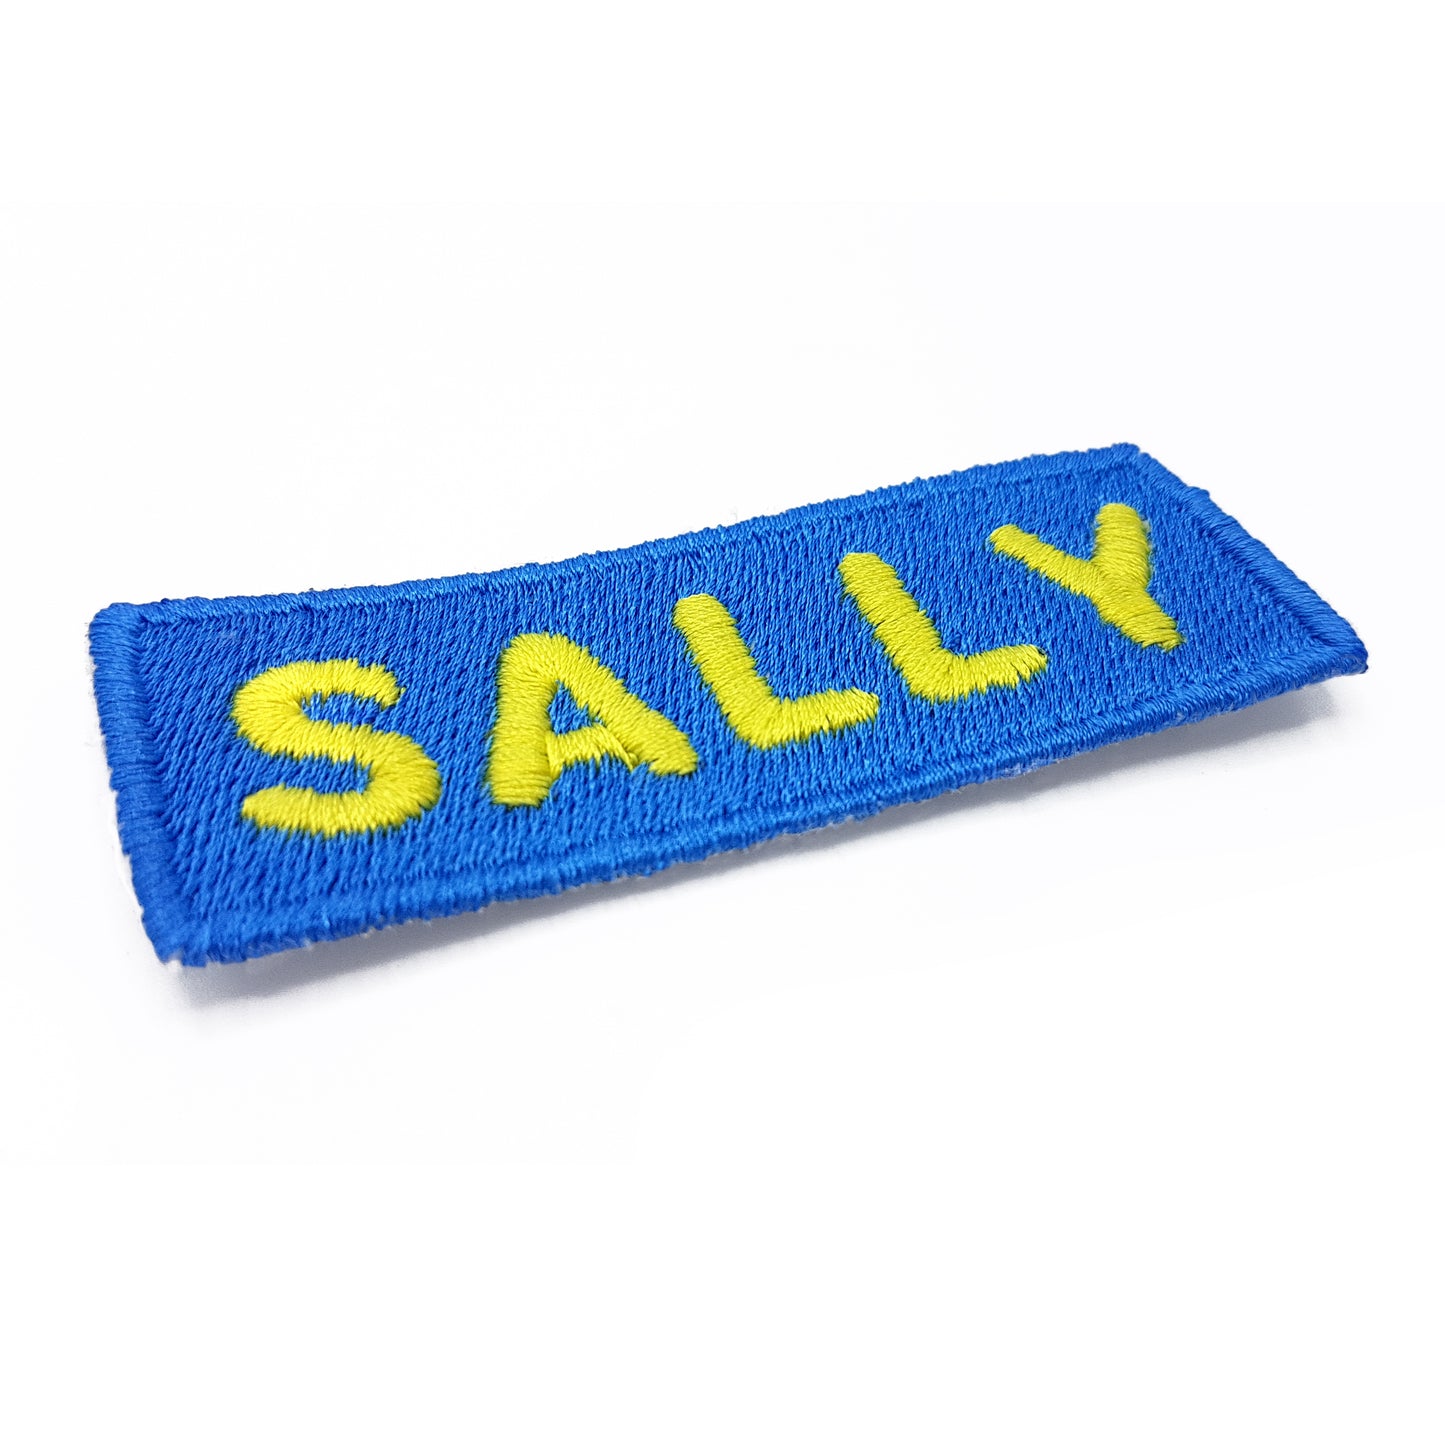 Personalised Embroidered Name Patch / Badge made to order - Sugar Gecko